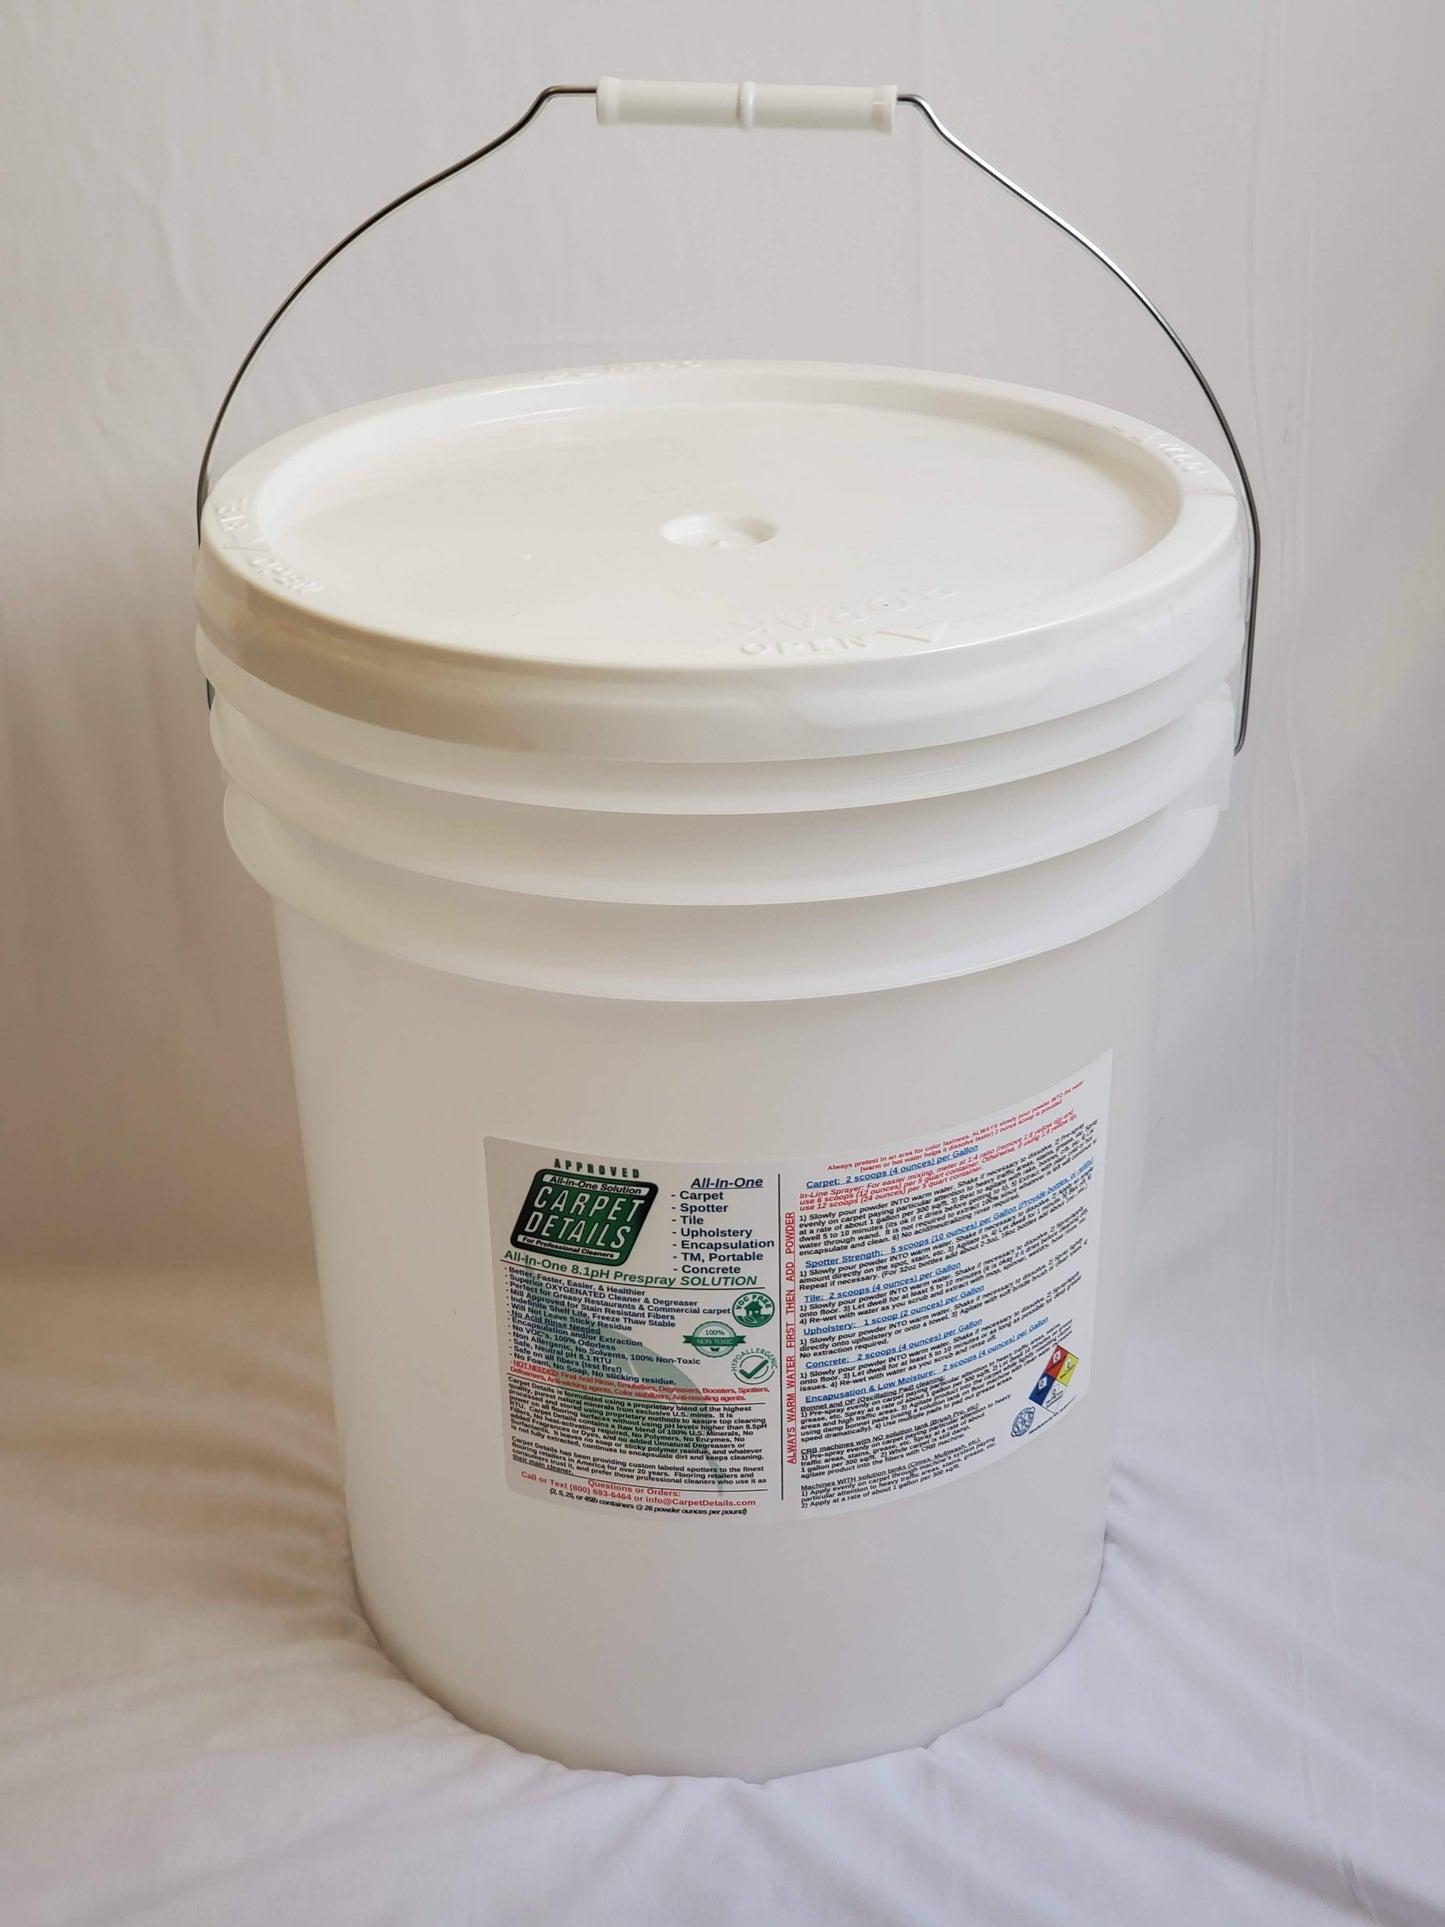 25 lb pail (FREE SHIPPING) 5 gal bucket of Professional Carpet Details All in One Prespray